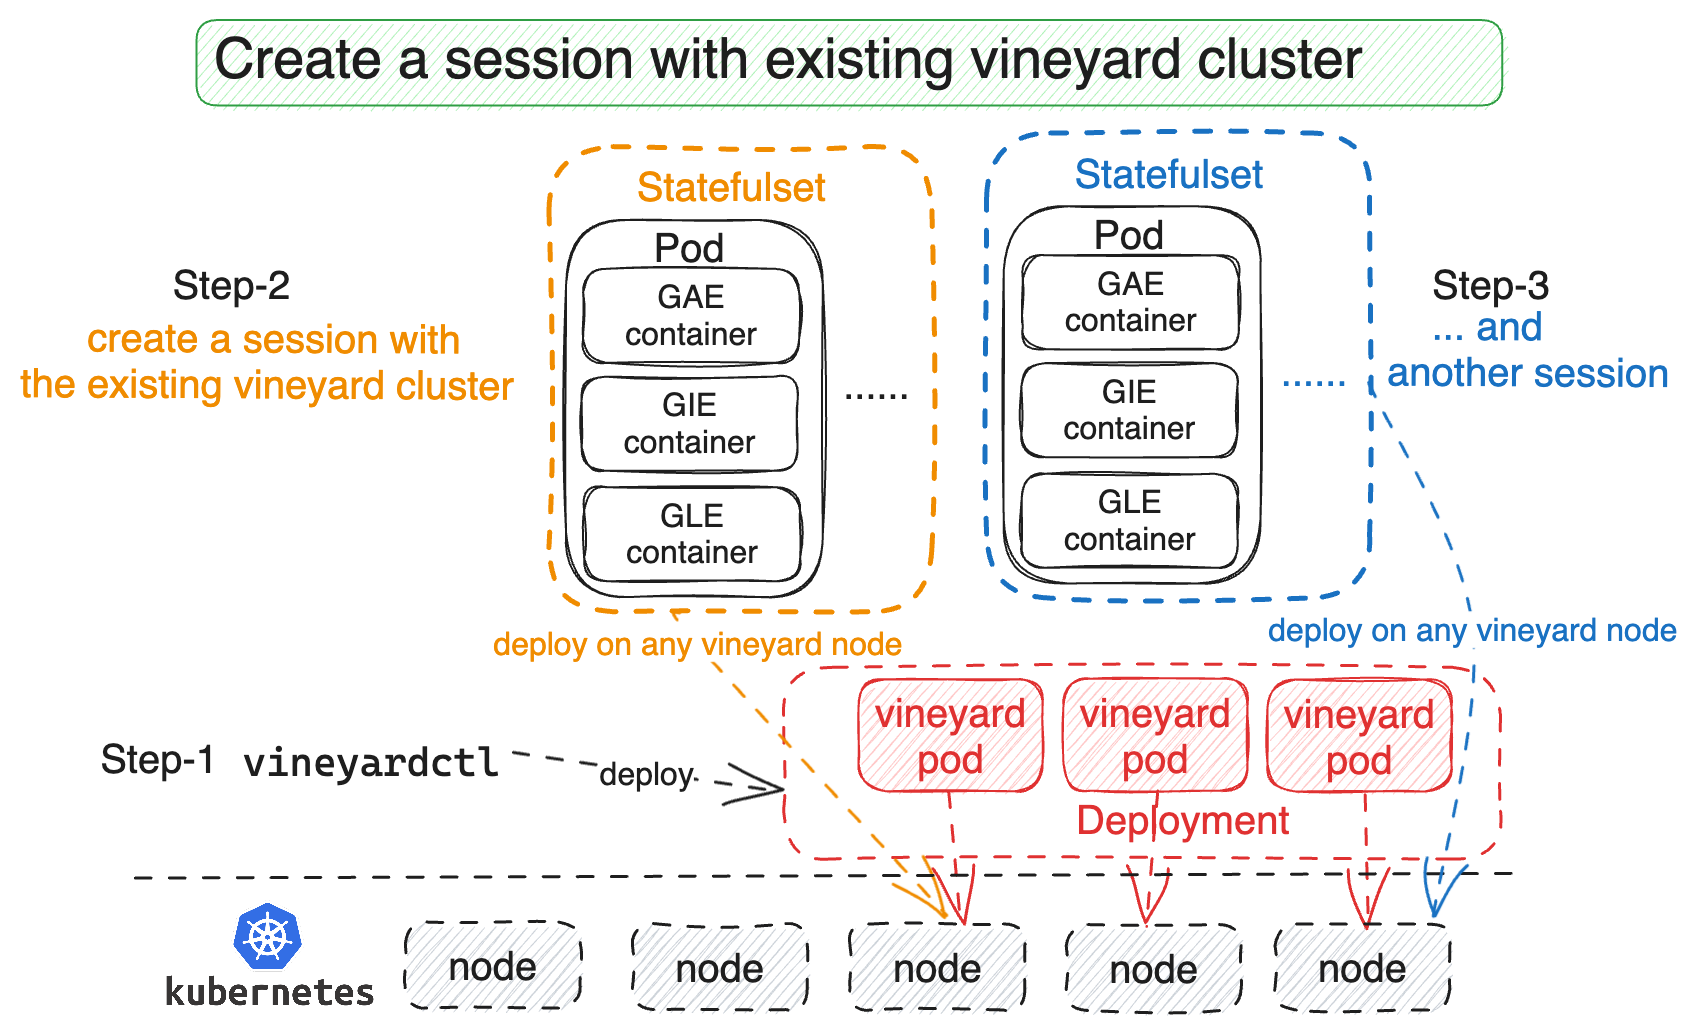 GraphScope sessions connect to an existing vineyard cluster